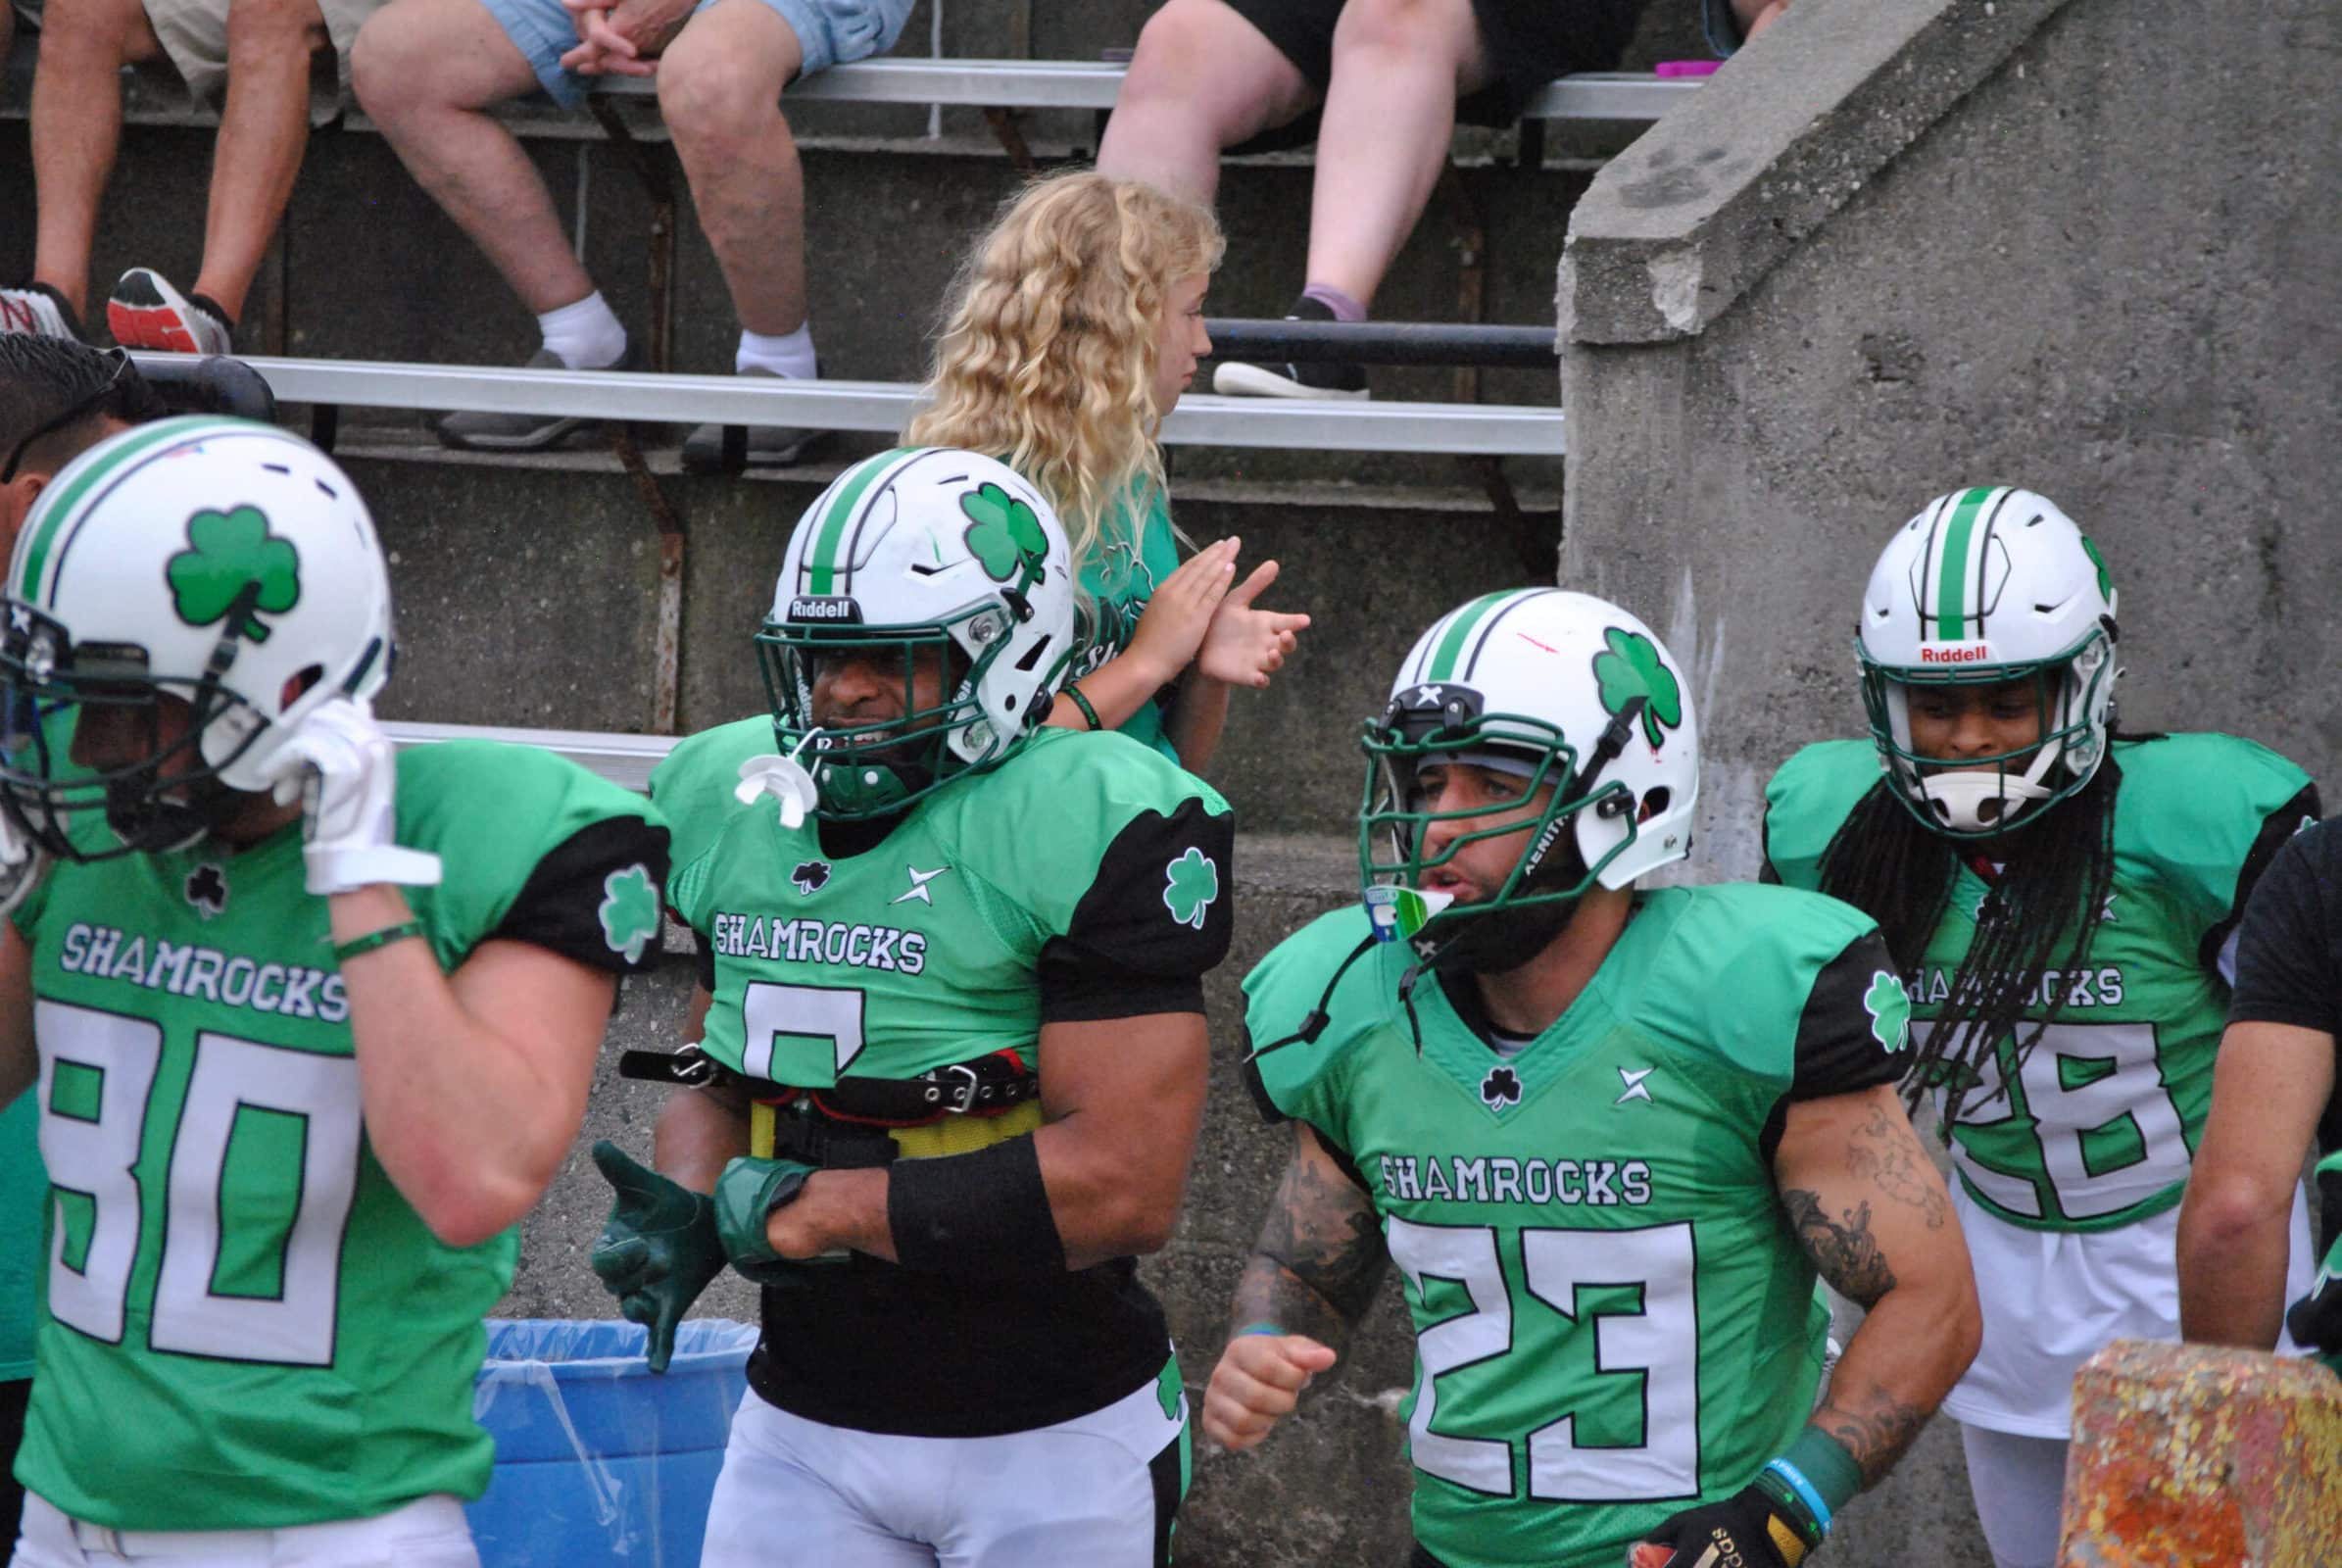 Shamrocks players exit the locker room at Kelleher Field before their game against Southern Maine on Aug. 7.